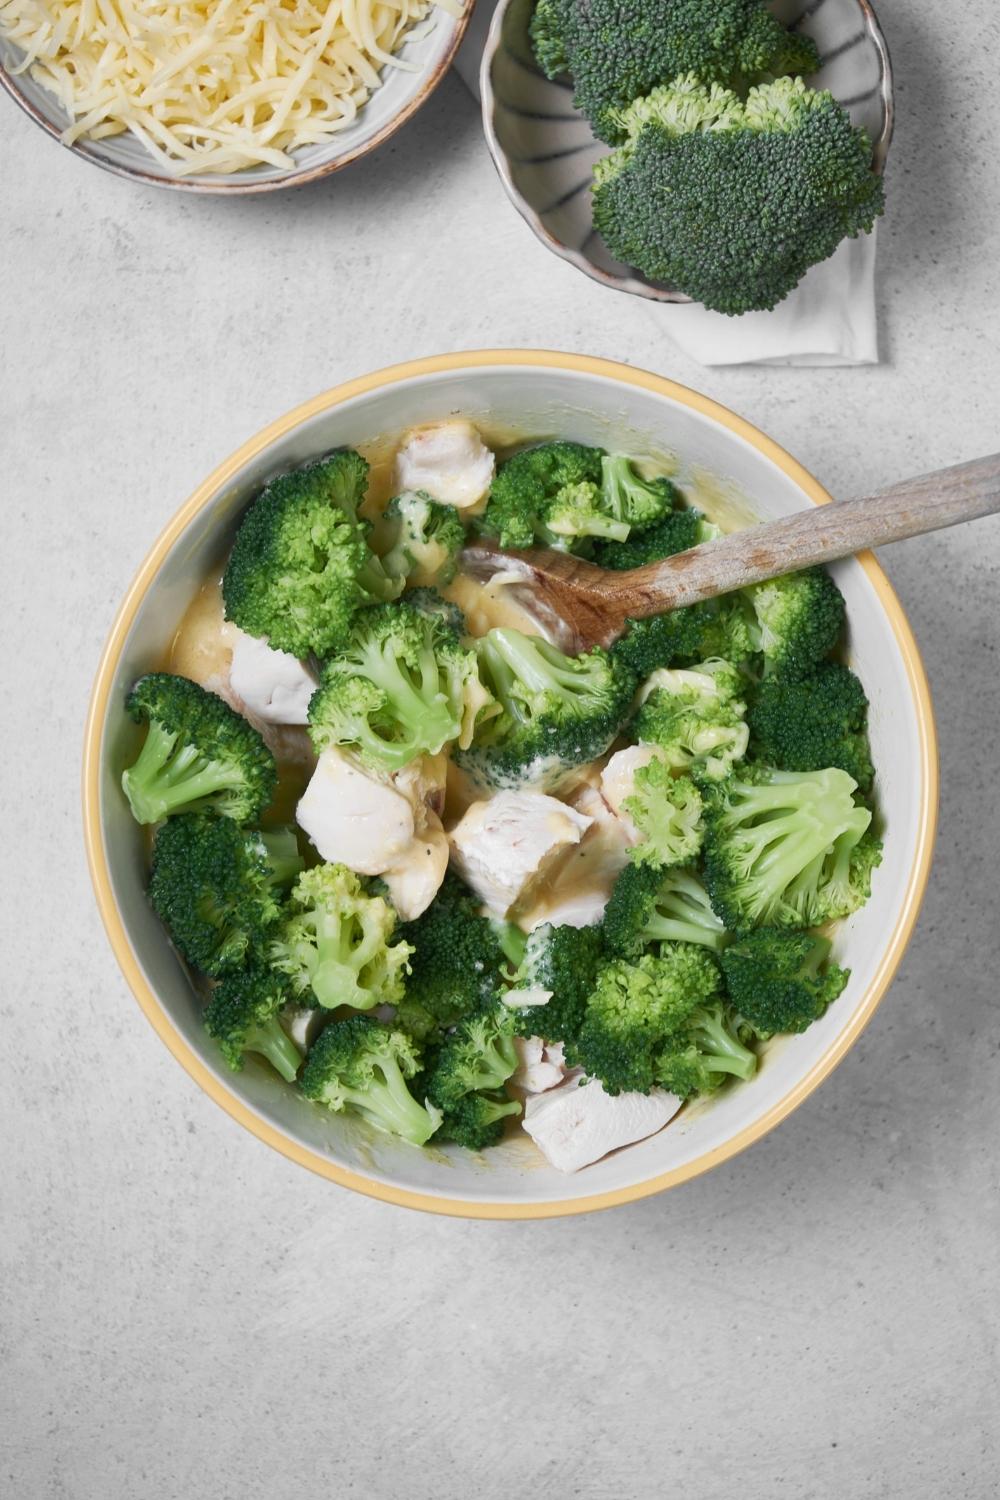 top view of a large mixing bowl filled with broccoli, sour cream, and condensed soup. a wooden spoon sits on top.